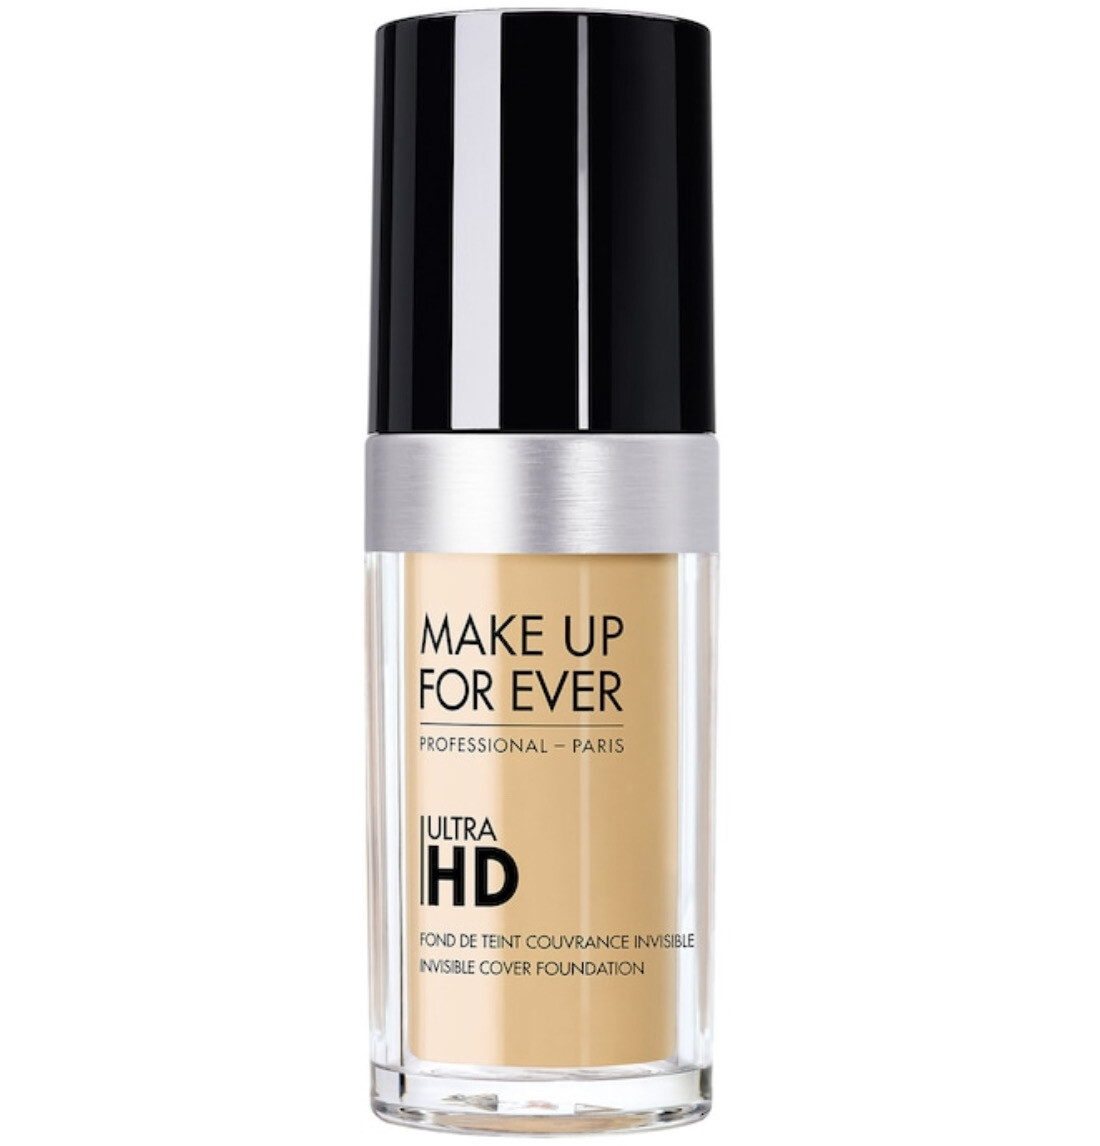 Make Up For Ever - Ultra HD Invisible Cover Foundation | Y245 Soft Sand - for lighter medium skin with yellow undertones